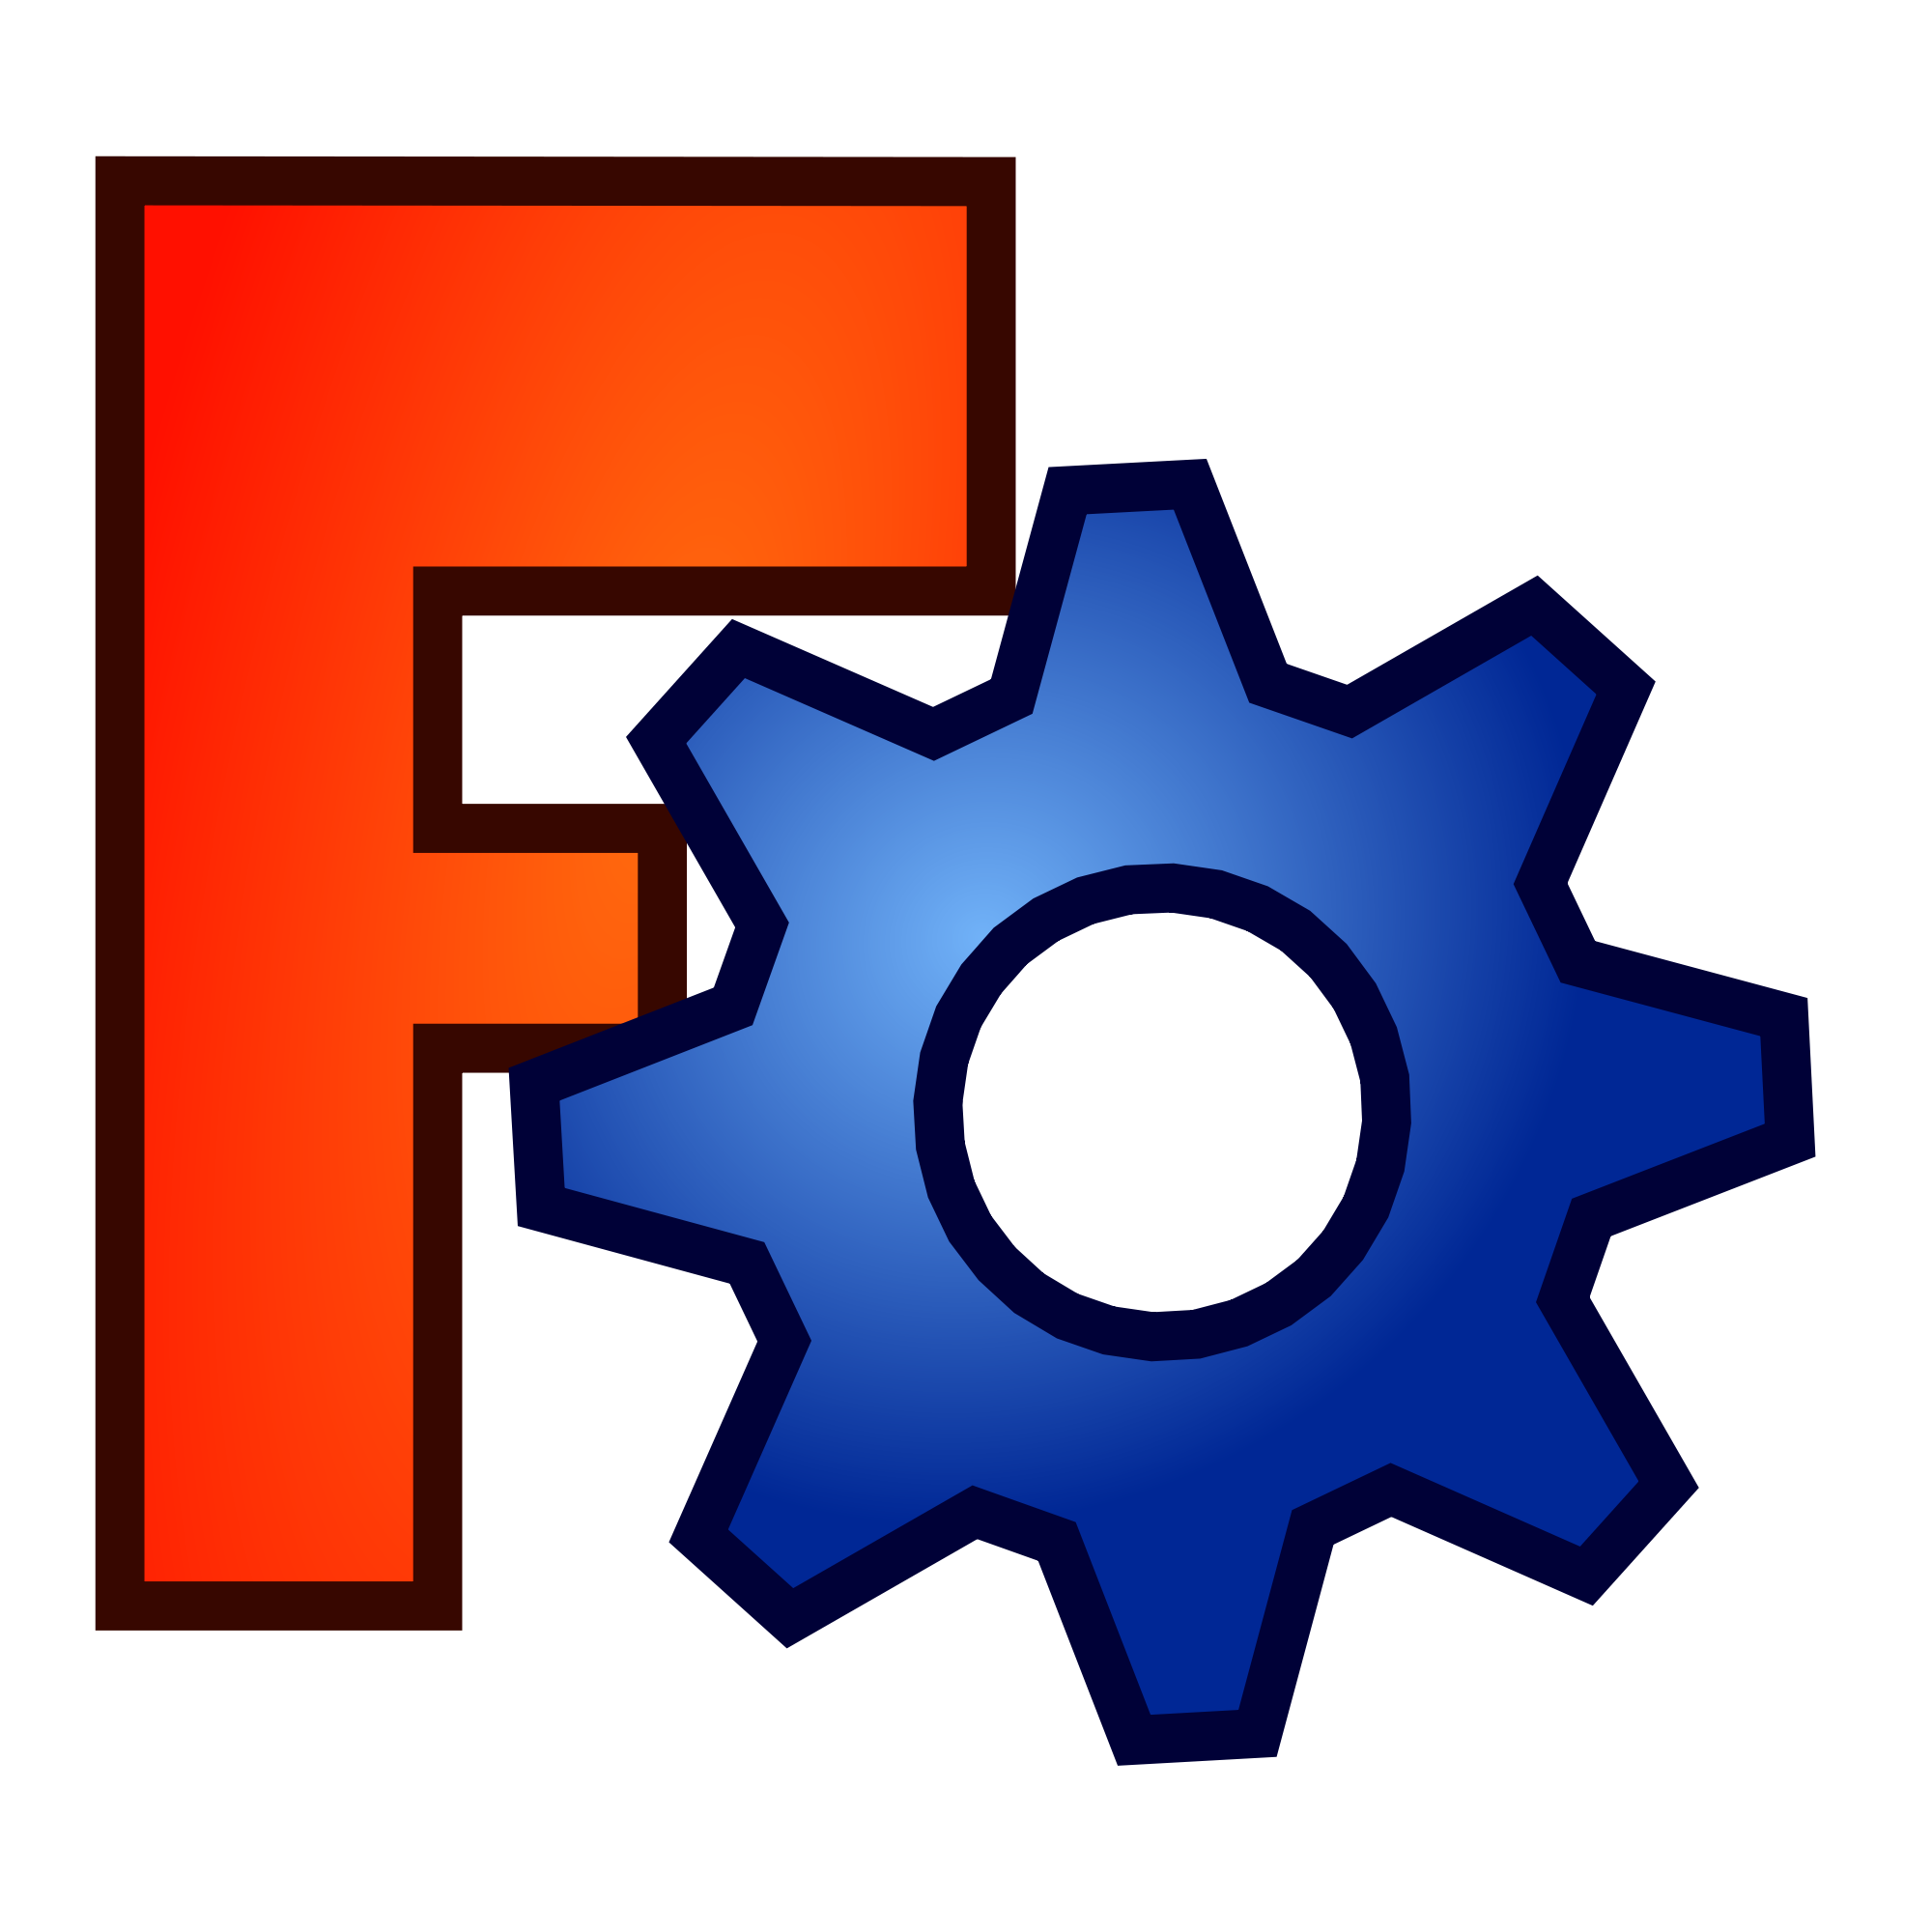 Download A Quick Look at FreeCAD